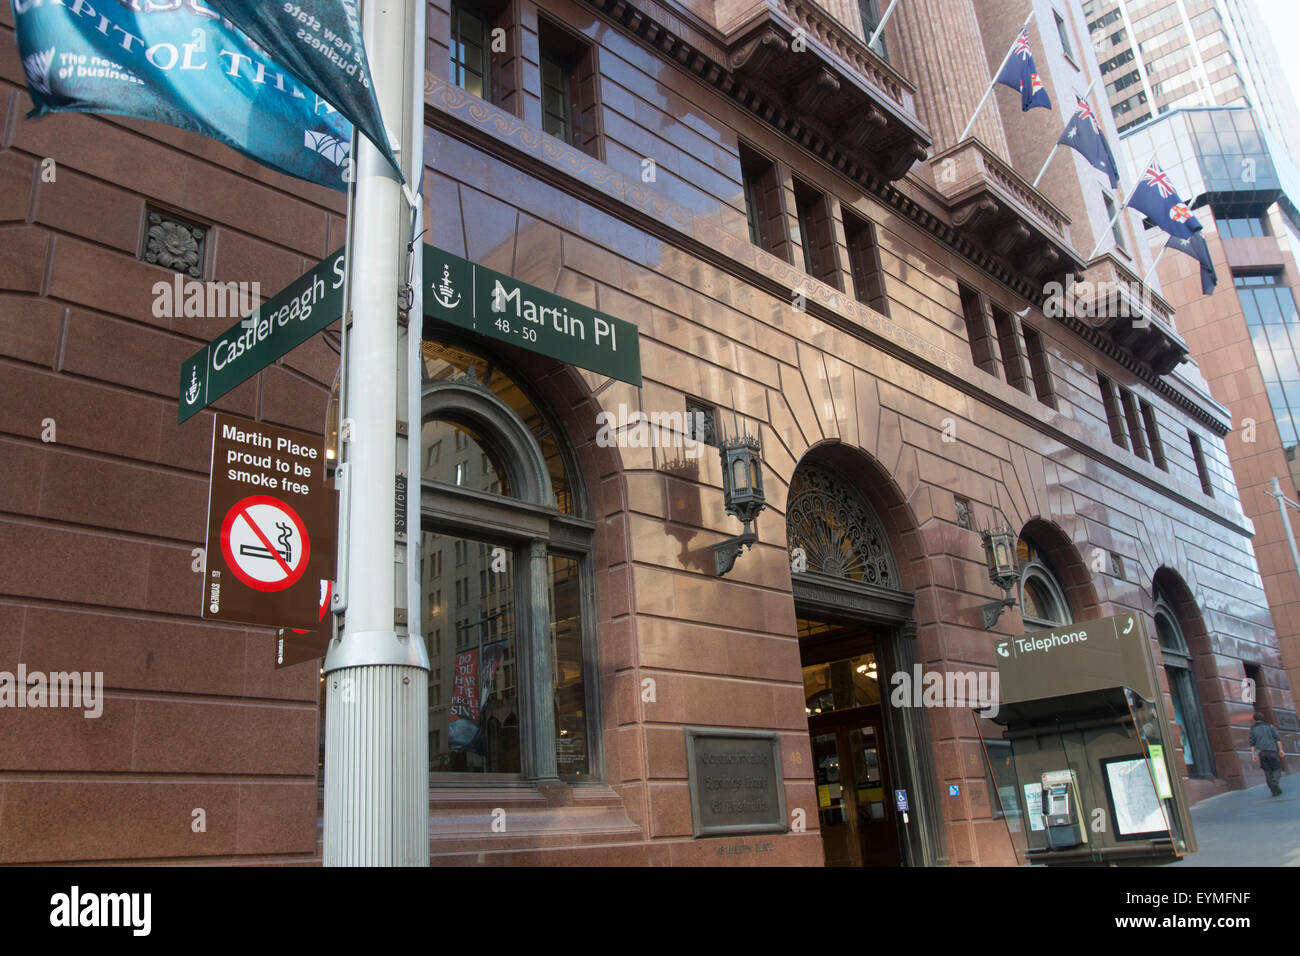 no smoking signs in martin place Sydney as the council trials a ban of smoking in this public place,Sydney,Australia Stock Photo